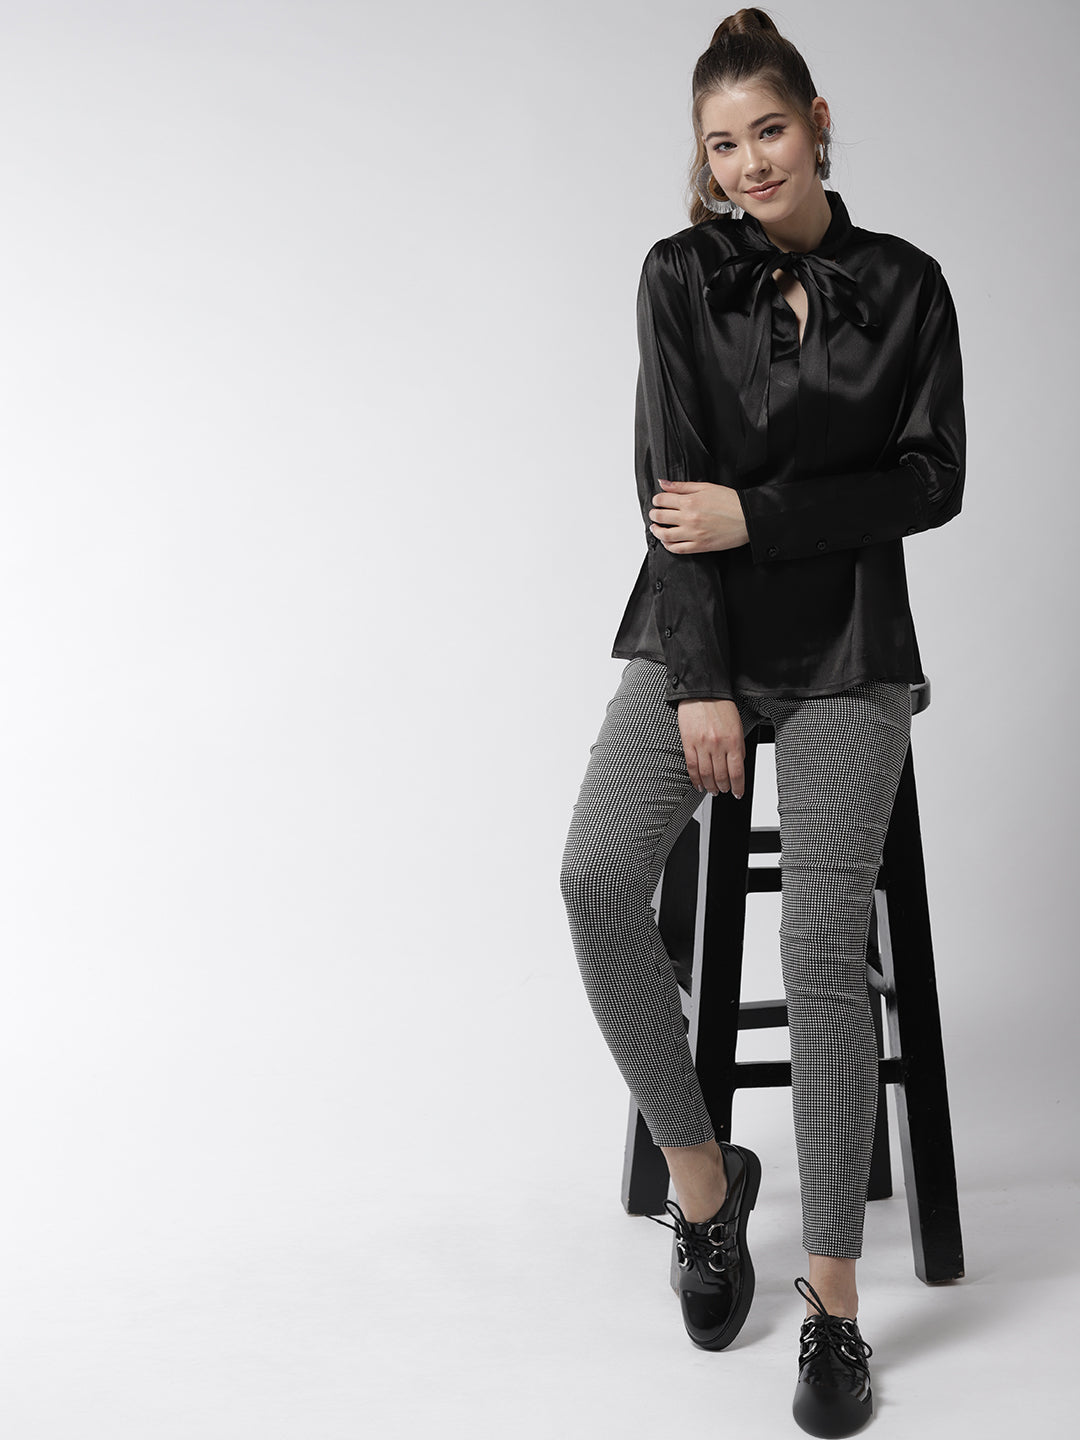 Women's Black Shirt with Long Cuff and attached Necktie - StyleStone